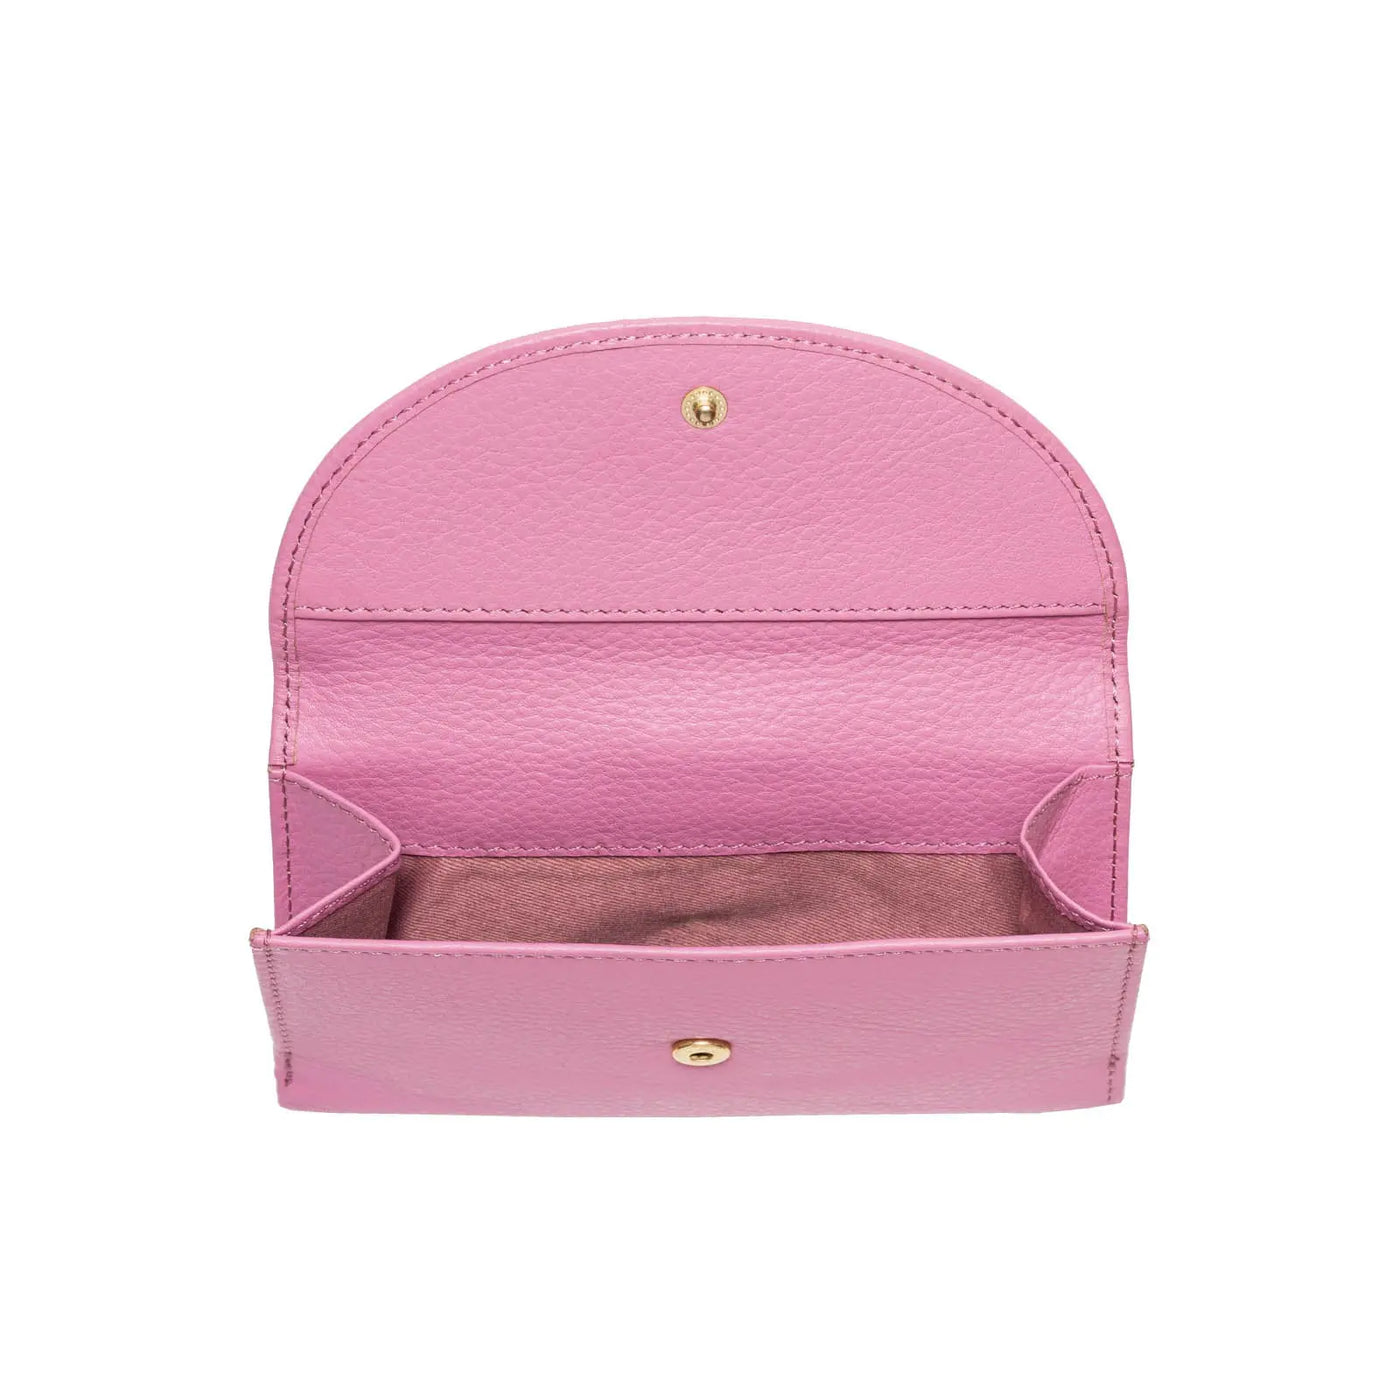 Pauline supple leather wallet pink